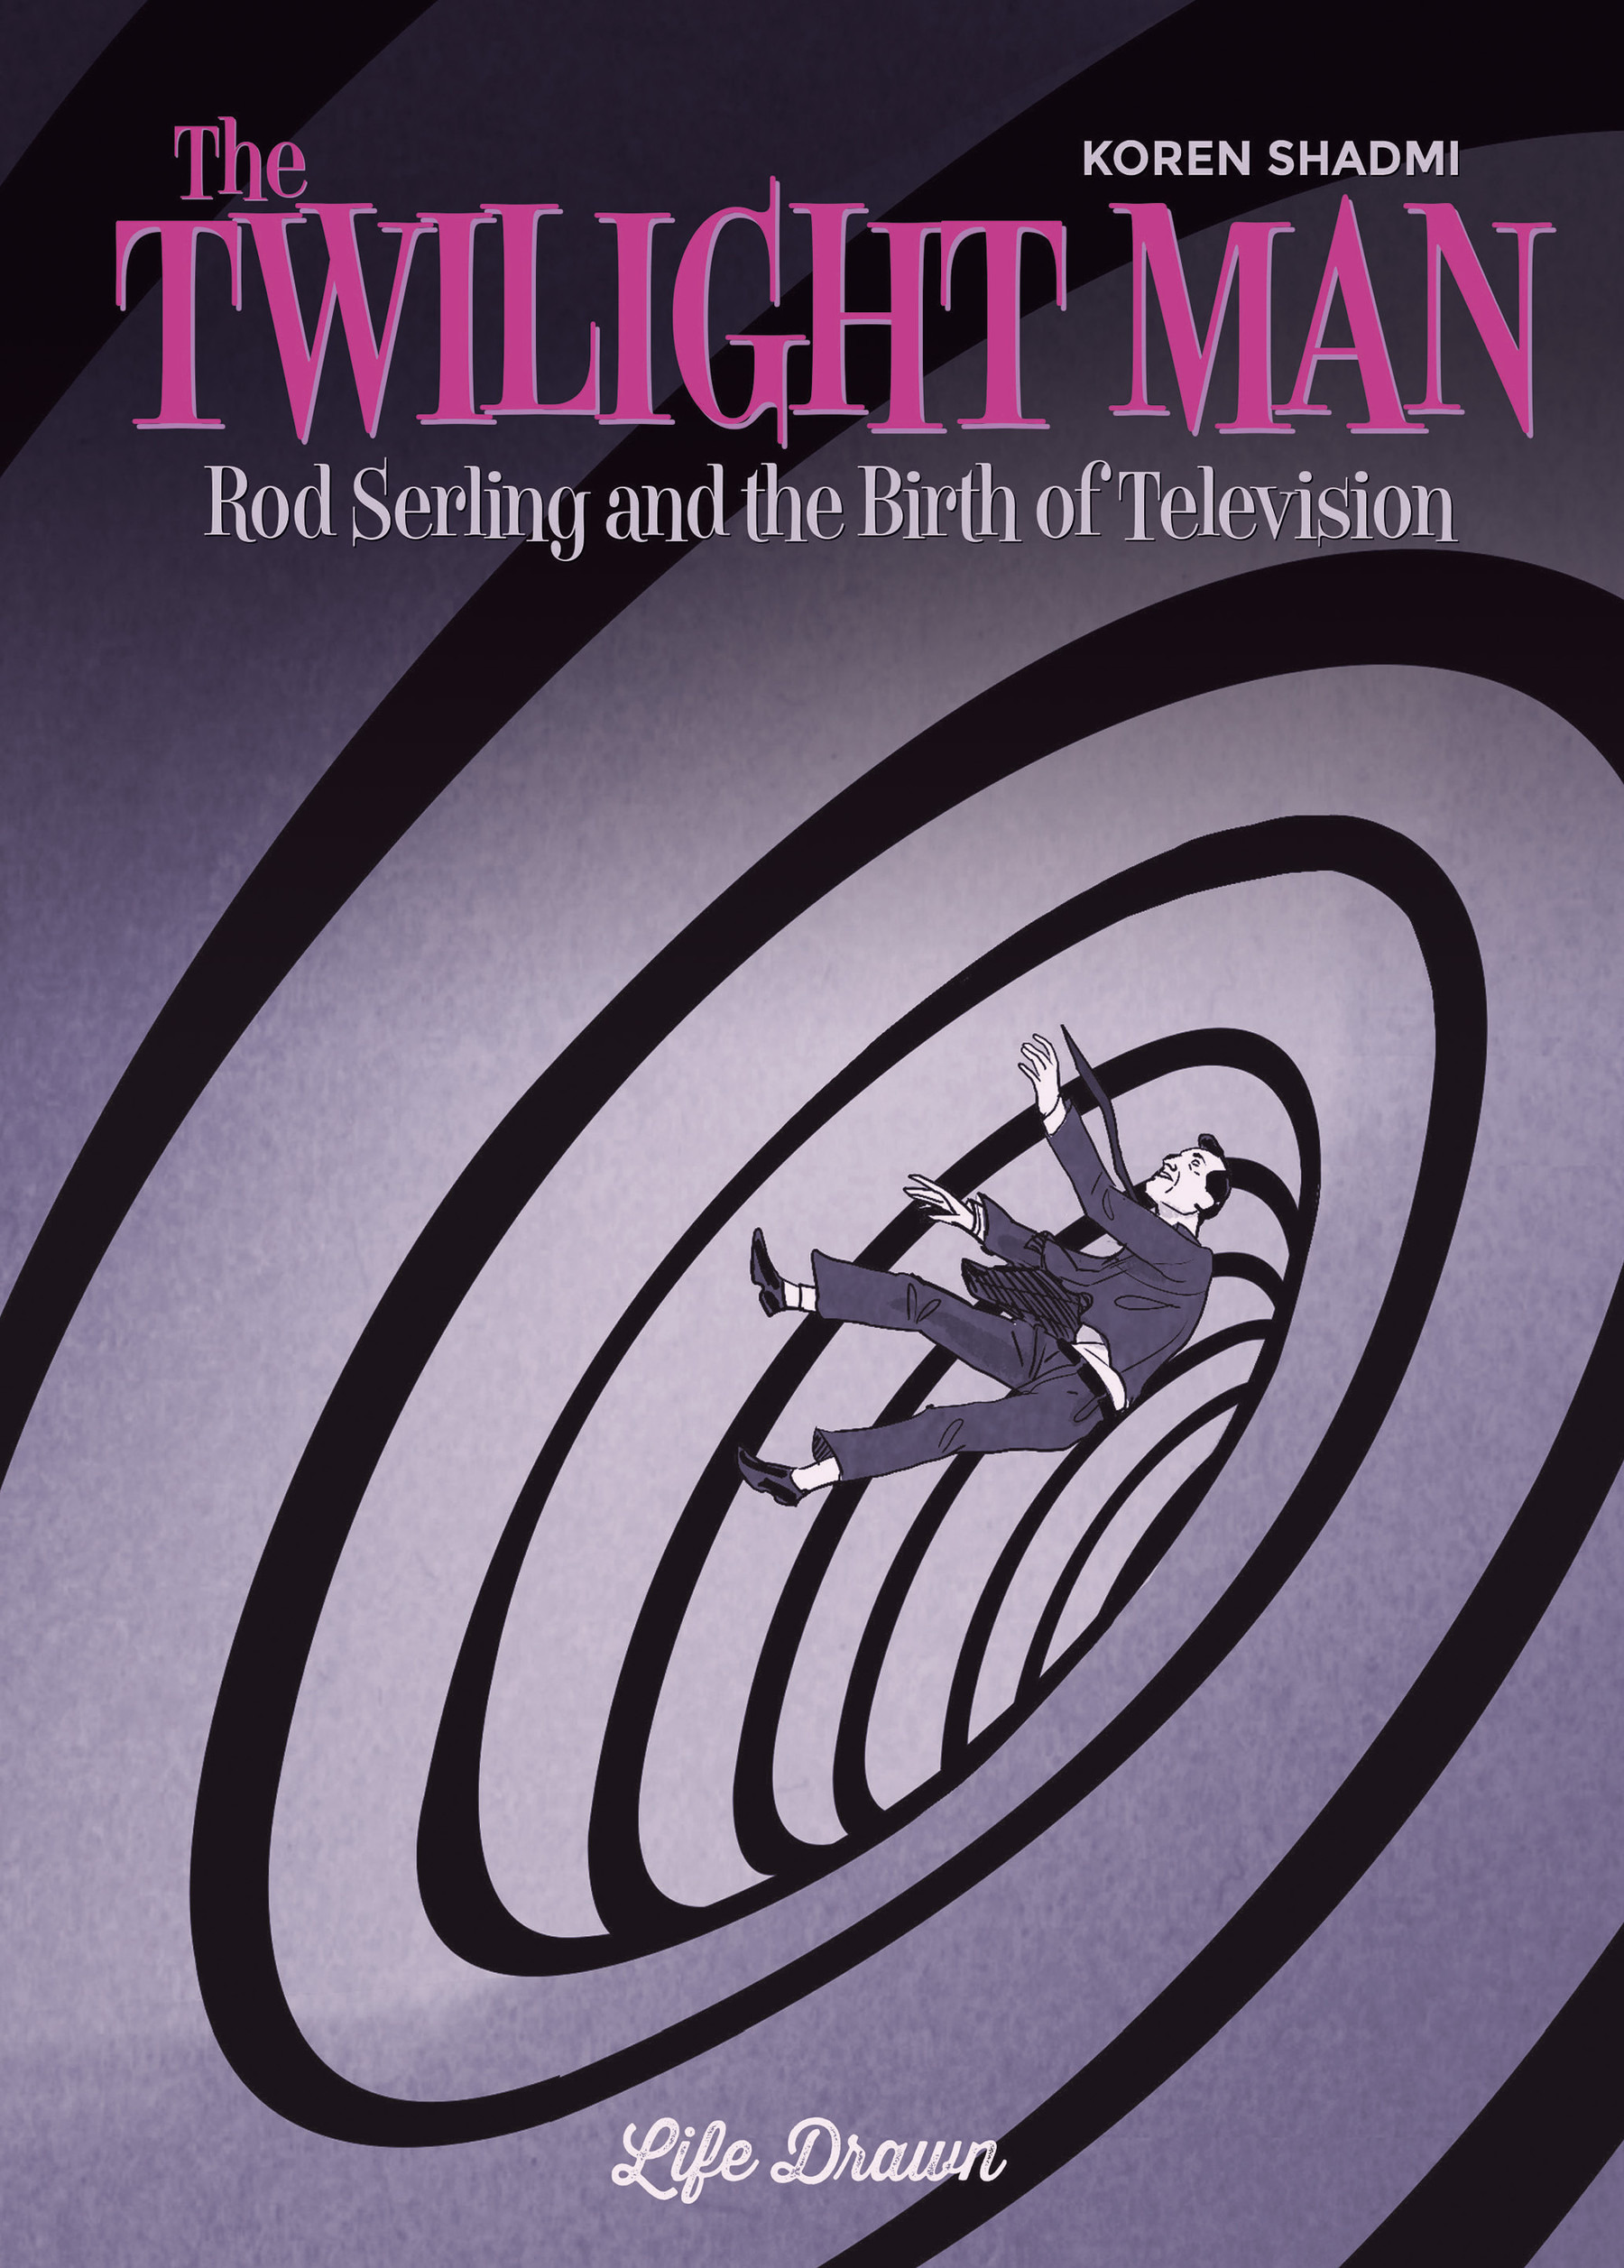 Read online The Twilight Man: Rod Serling and the Birth of Television comic -  Issue # TPB (Part 1) - 2